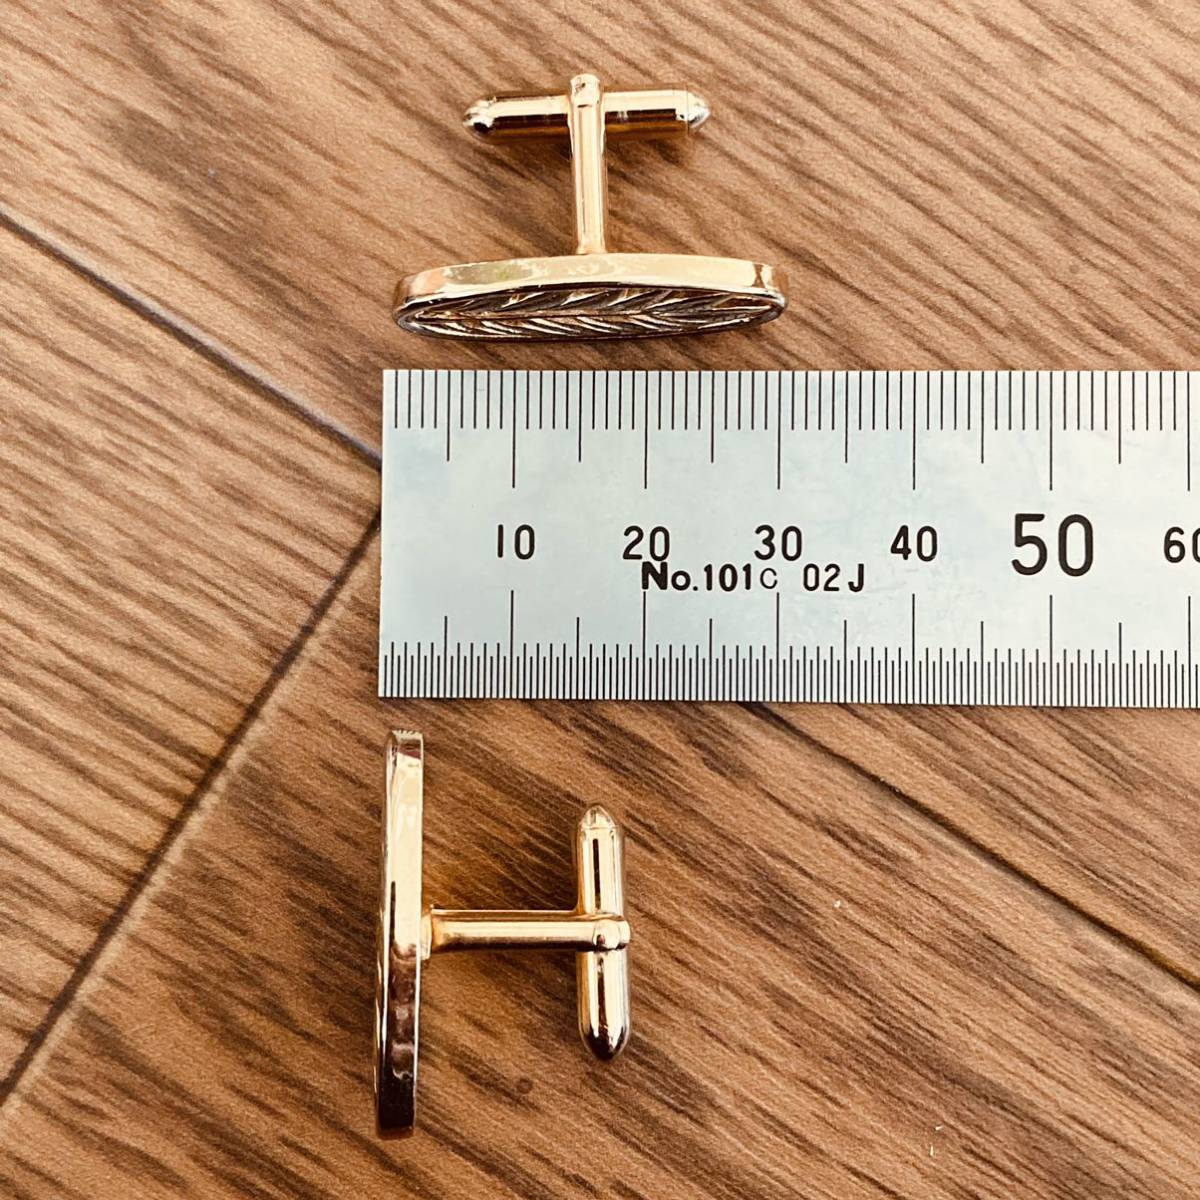  free shipping US Vintage cuff links SWANKs one k leaf Gold tone cuffs button 